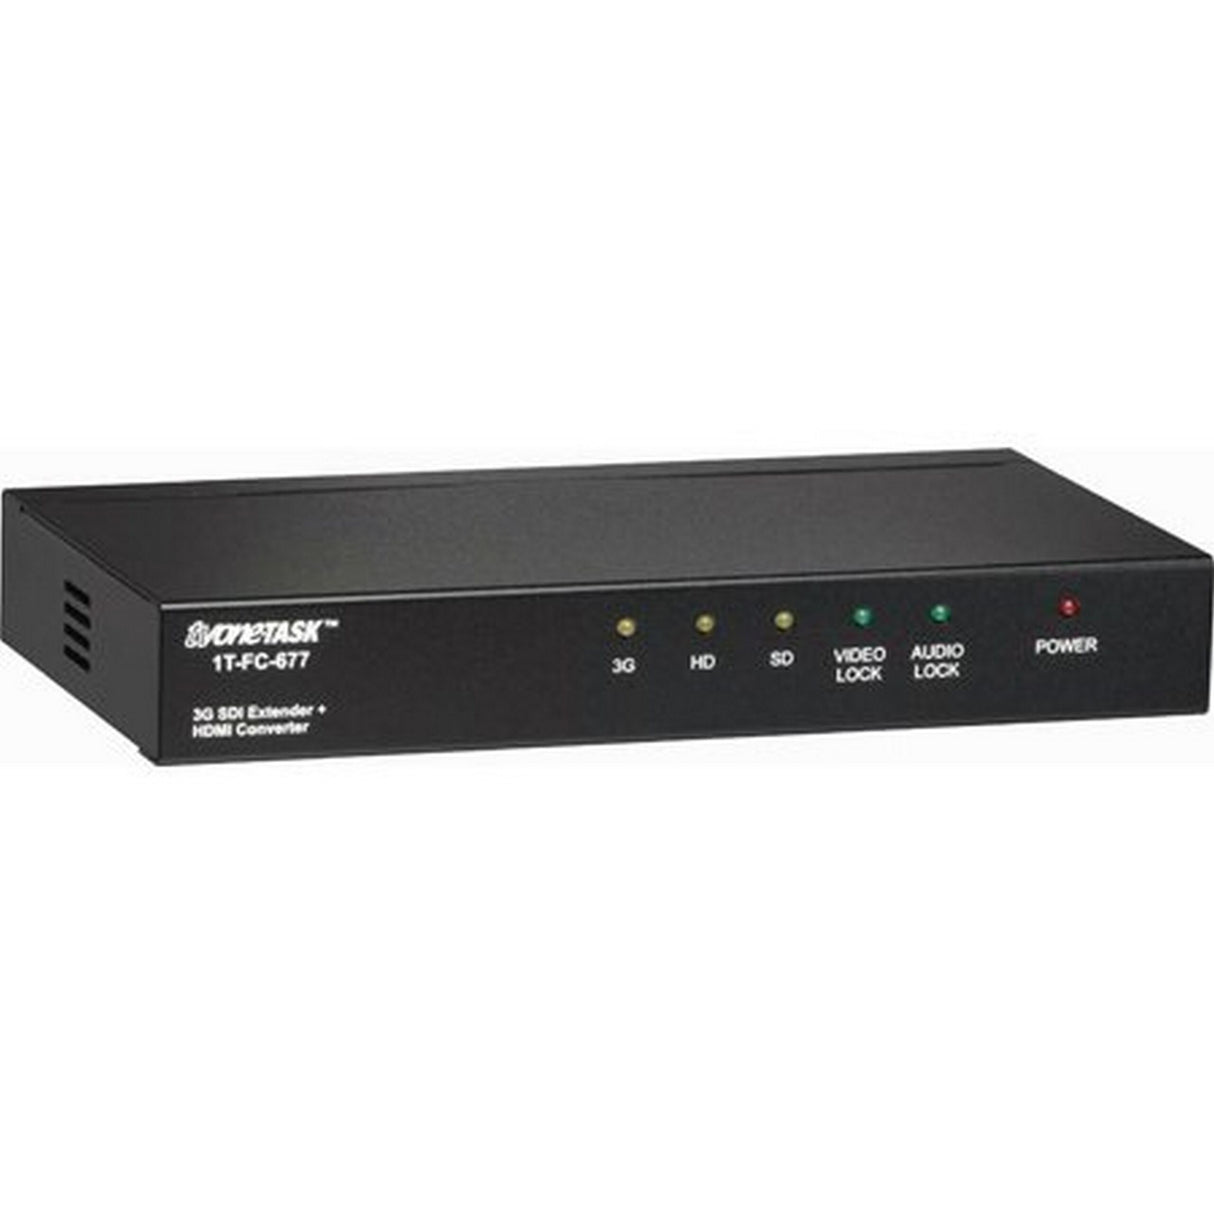 tvONE 1T-FC-677 3G/HD/SD-SDI to HDMIv1.3 Converter with Built-In SDI Distribution Amplifier